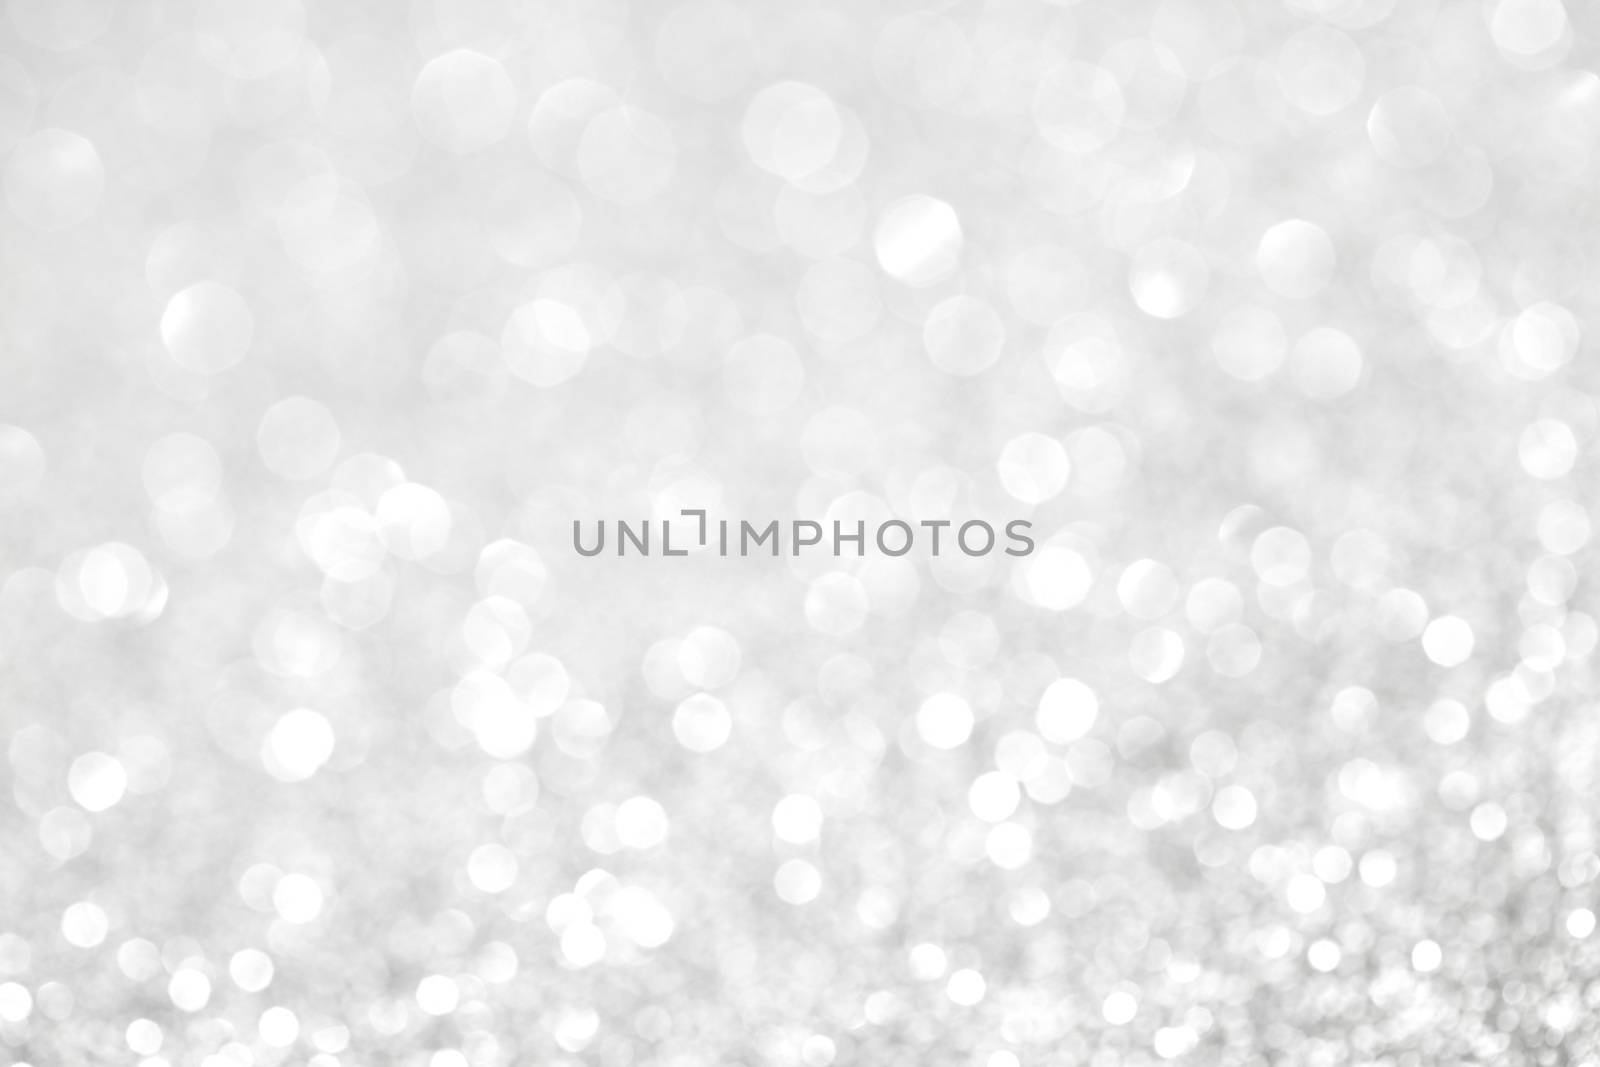 Abstract silver background by Yellowj